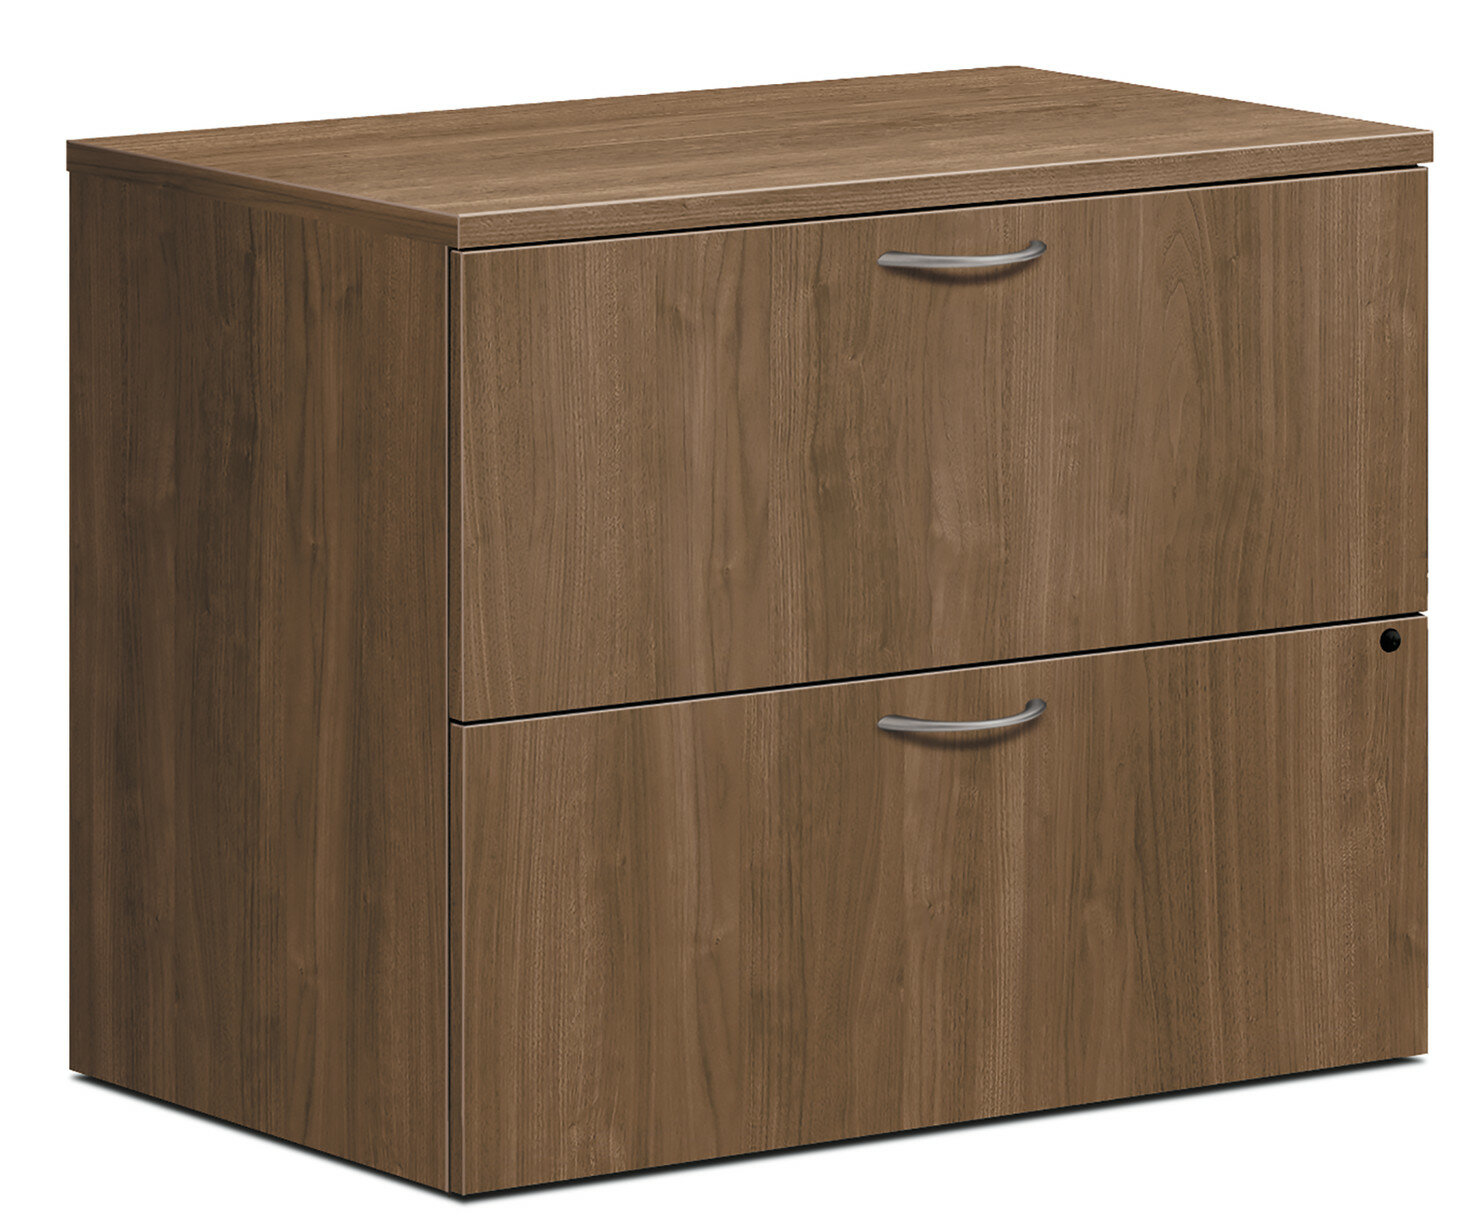 Hon Foundation 2 Drawer Lateral Filing Cabinet Wayfair